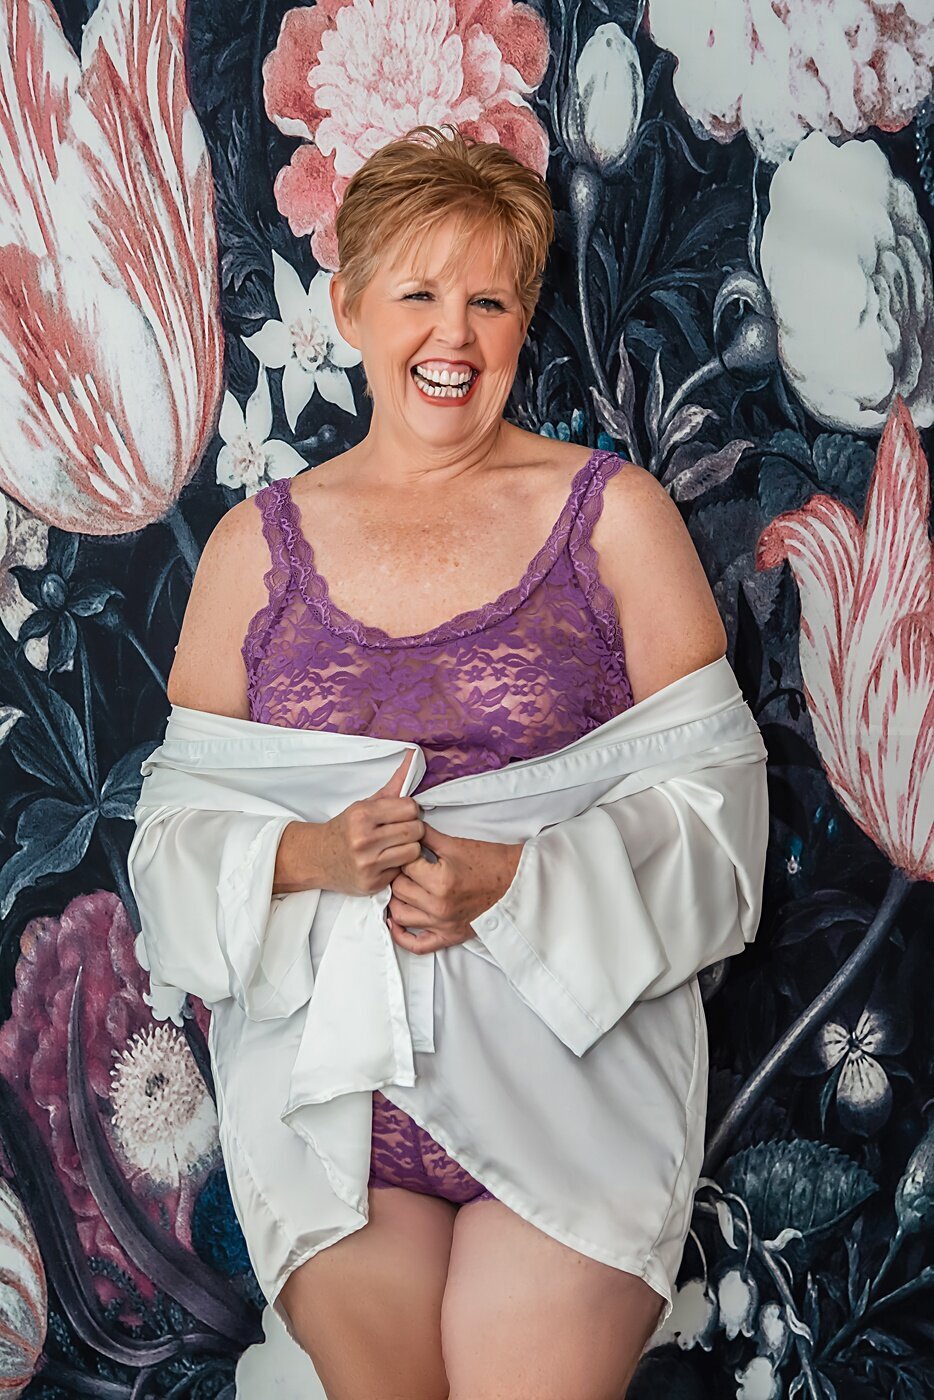 A older woman in purple lingerie poses during her boudoir session.